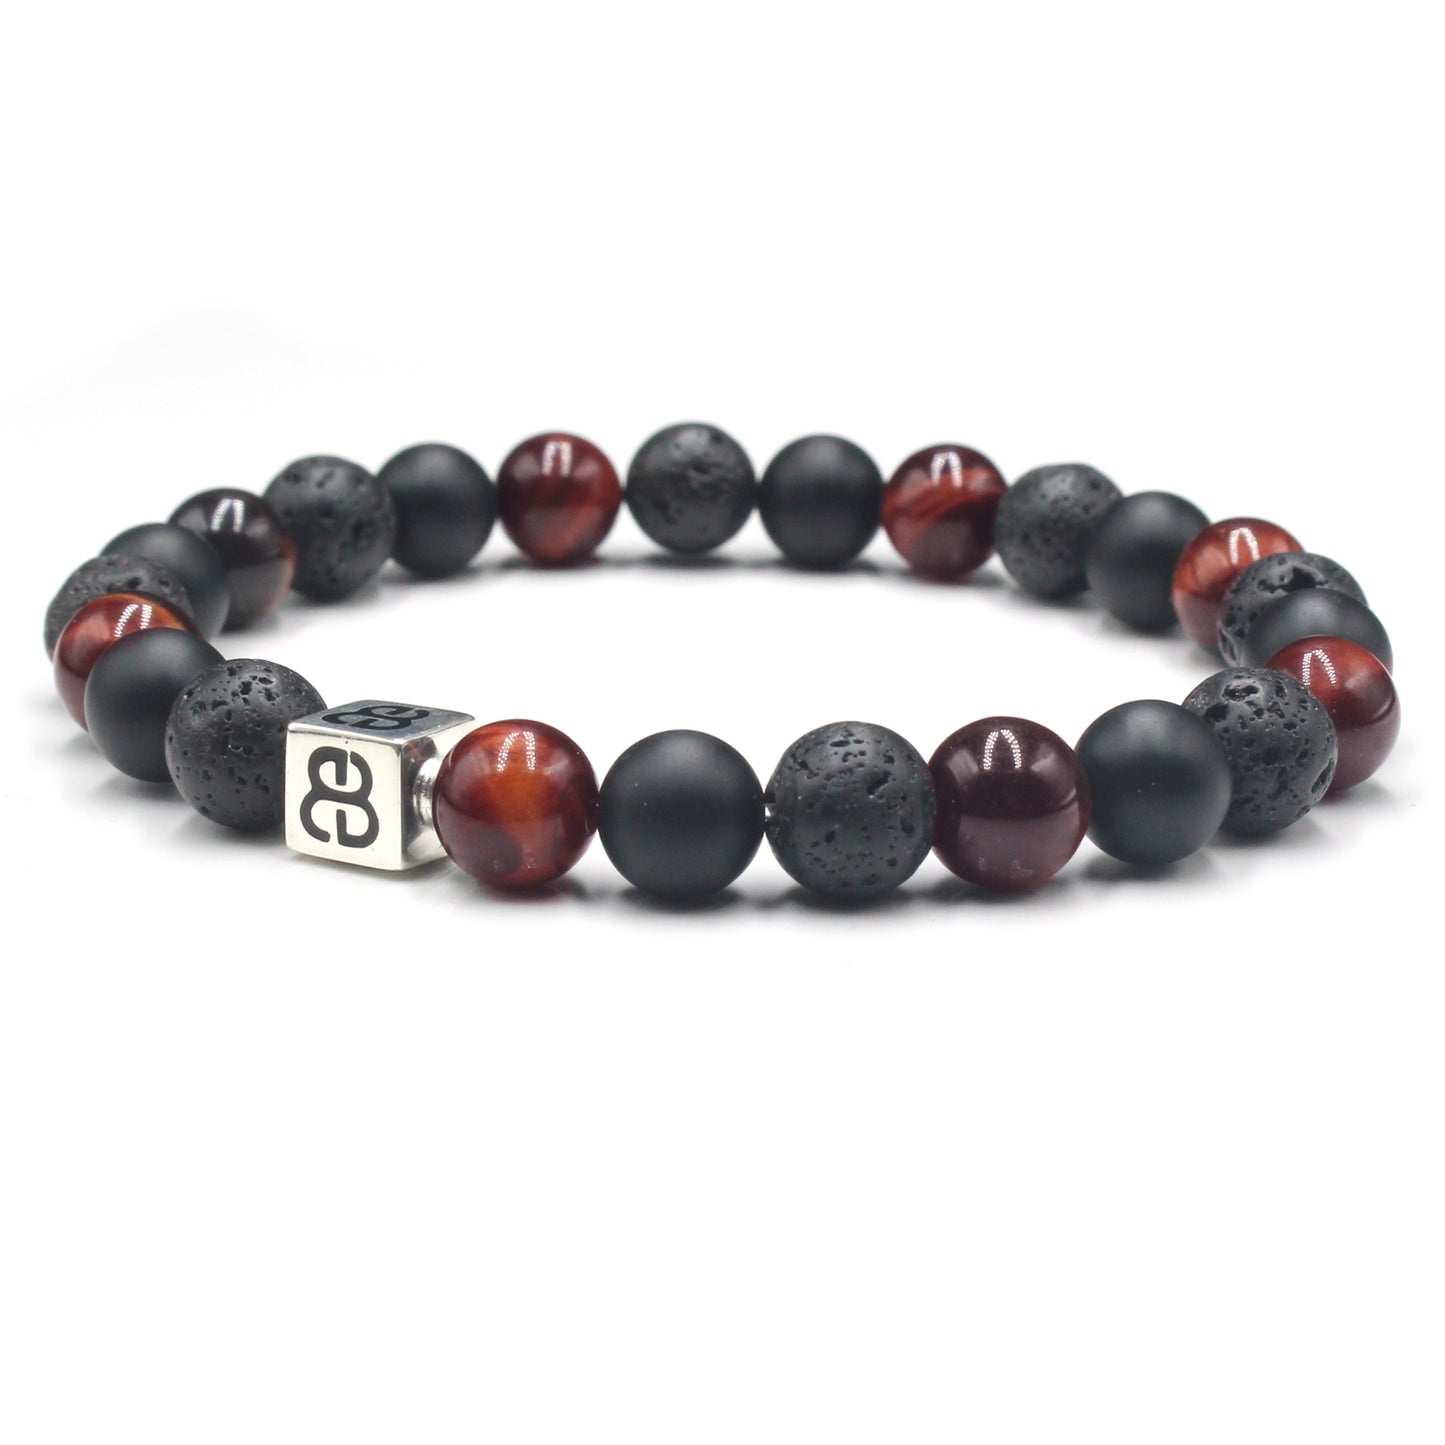 Onyx, Lava, and Red Tiger's Eye